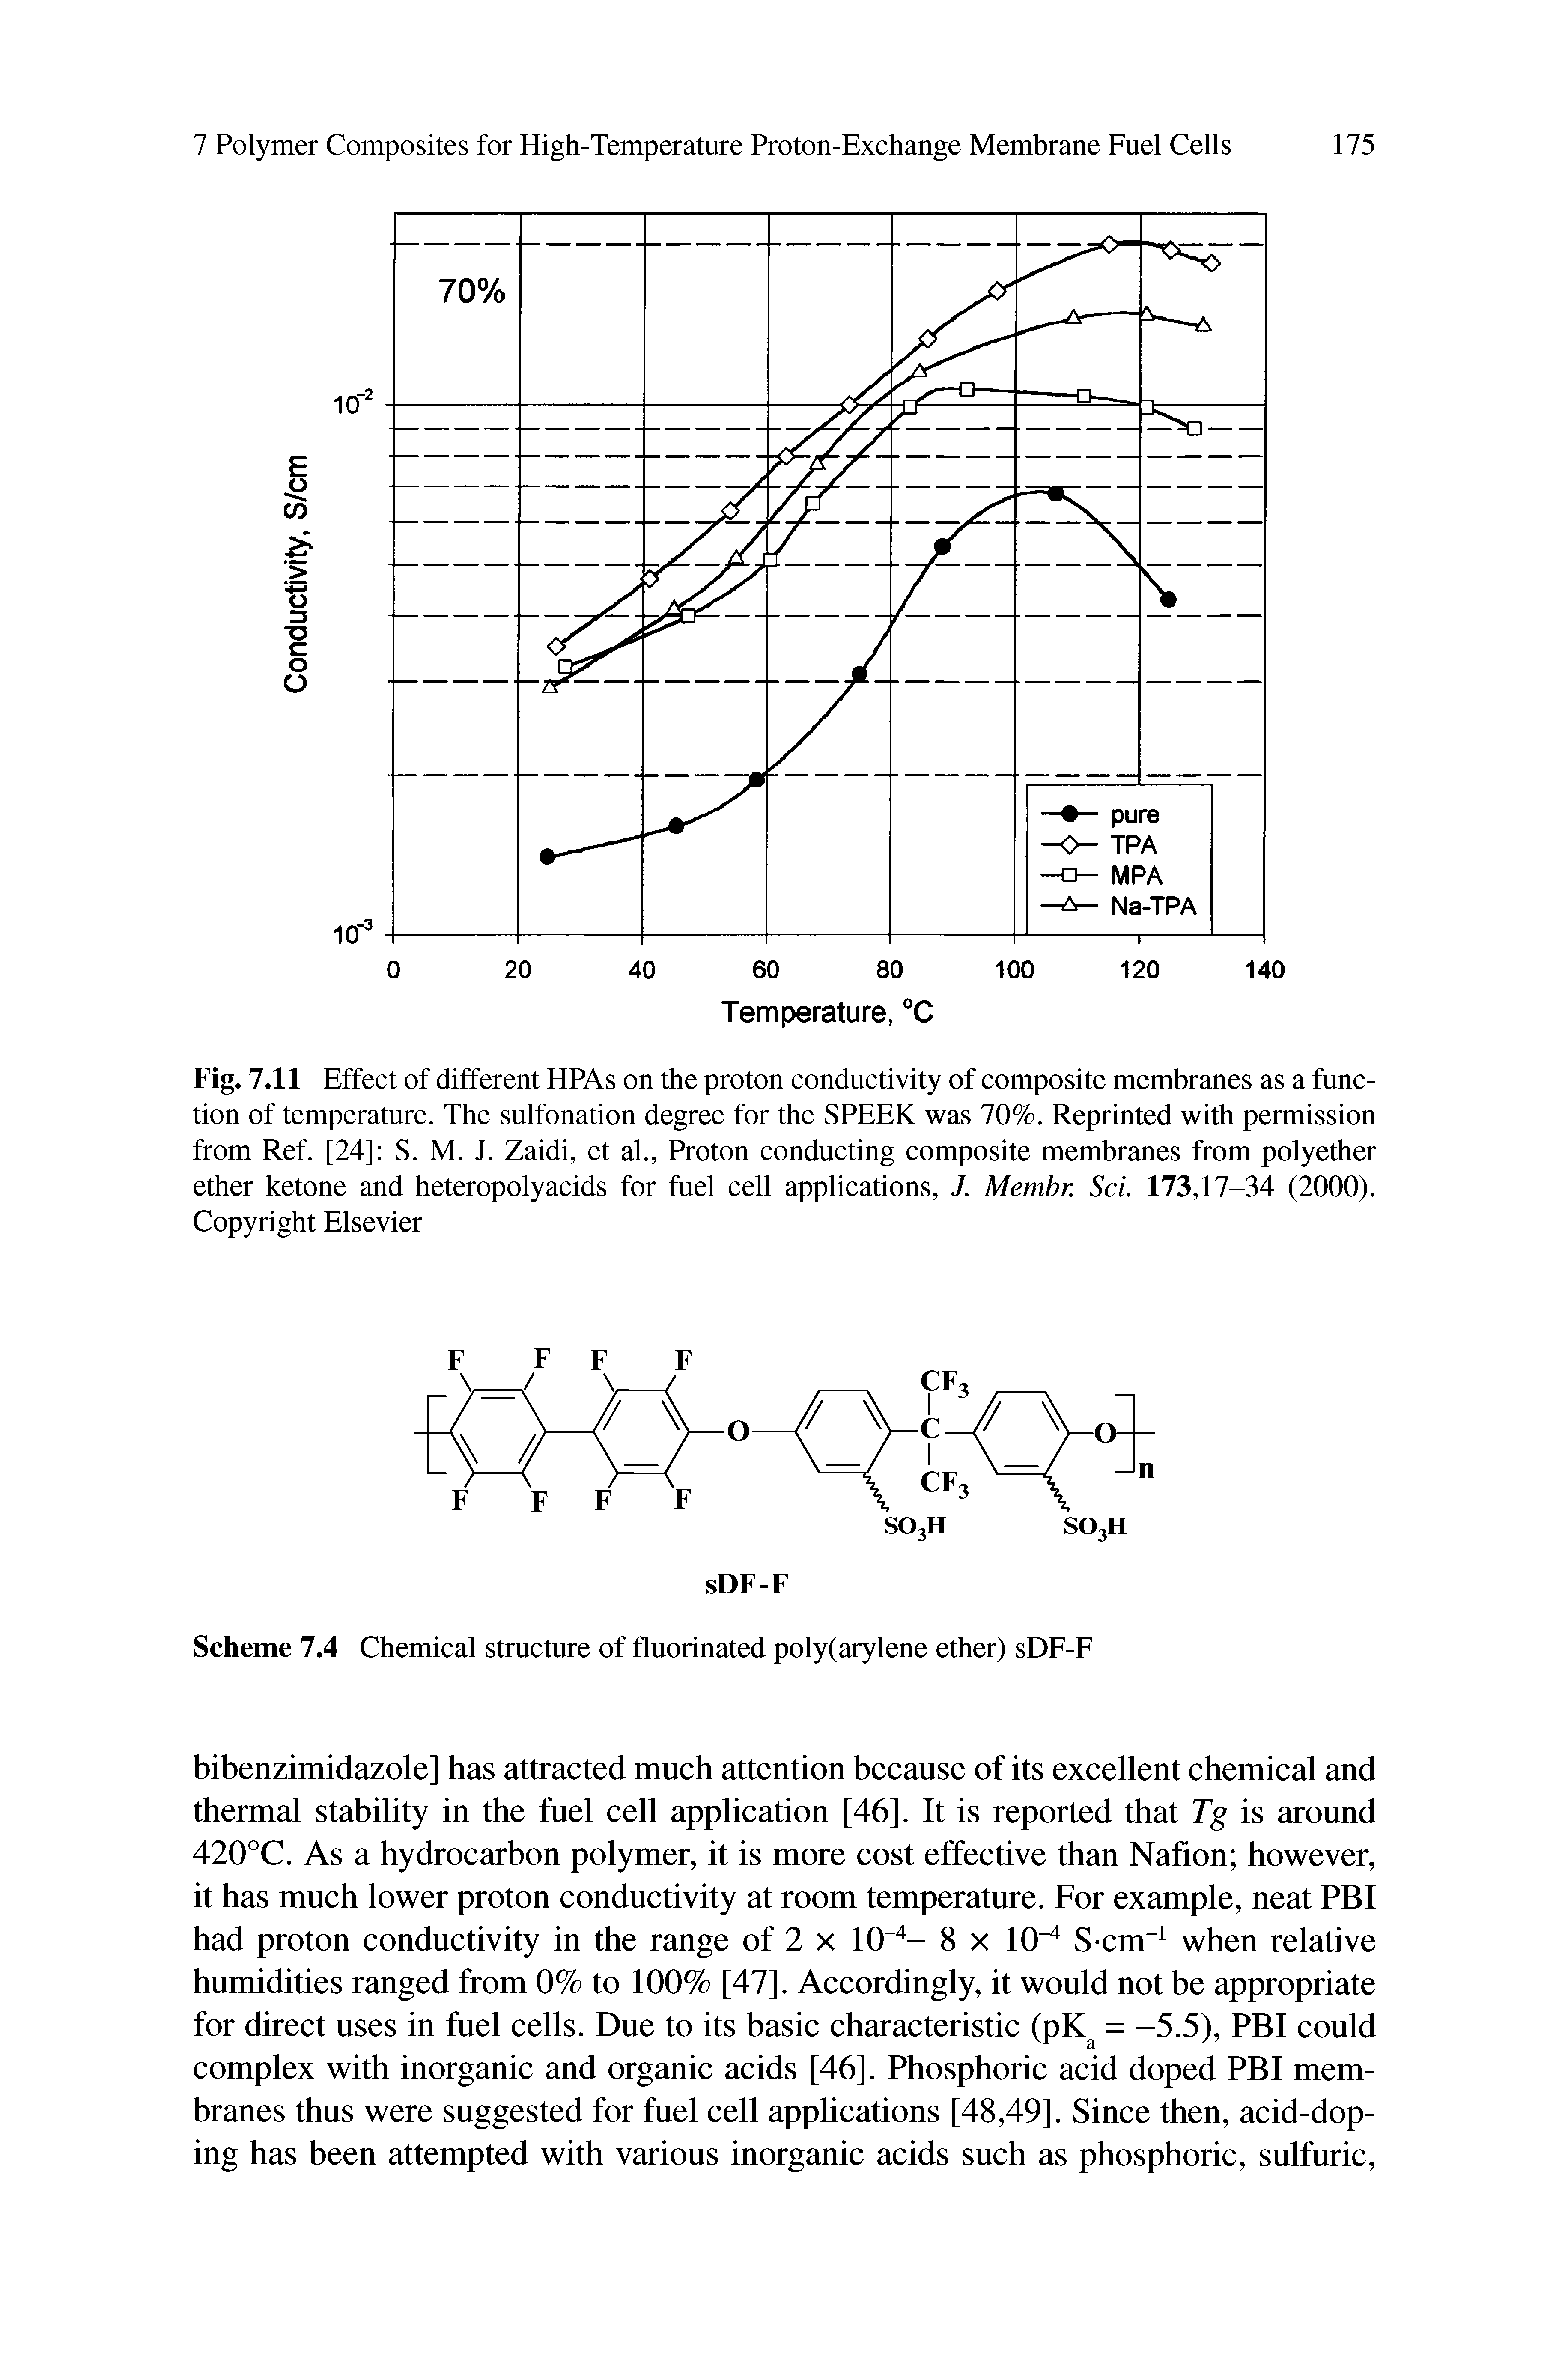 Fig. 7.11 Effect of different HPAs on the proton conductivity of composite membranes as a function of temperature. The sulfonation degree for the SPEEK was 70%. Reprinted with permission from Ref. [24] S. M. J. Zaidi, et al., Proton conducting composite membranes from polyether ether ketone and heteropolyacids for fuel cell applications, J. Membn Scl 173,17-34 (2000). Copyright Elsevier...